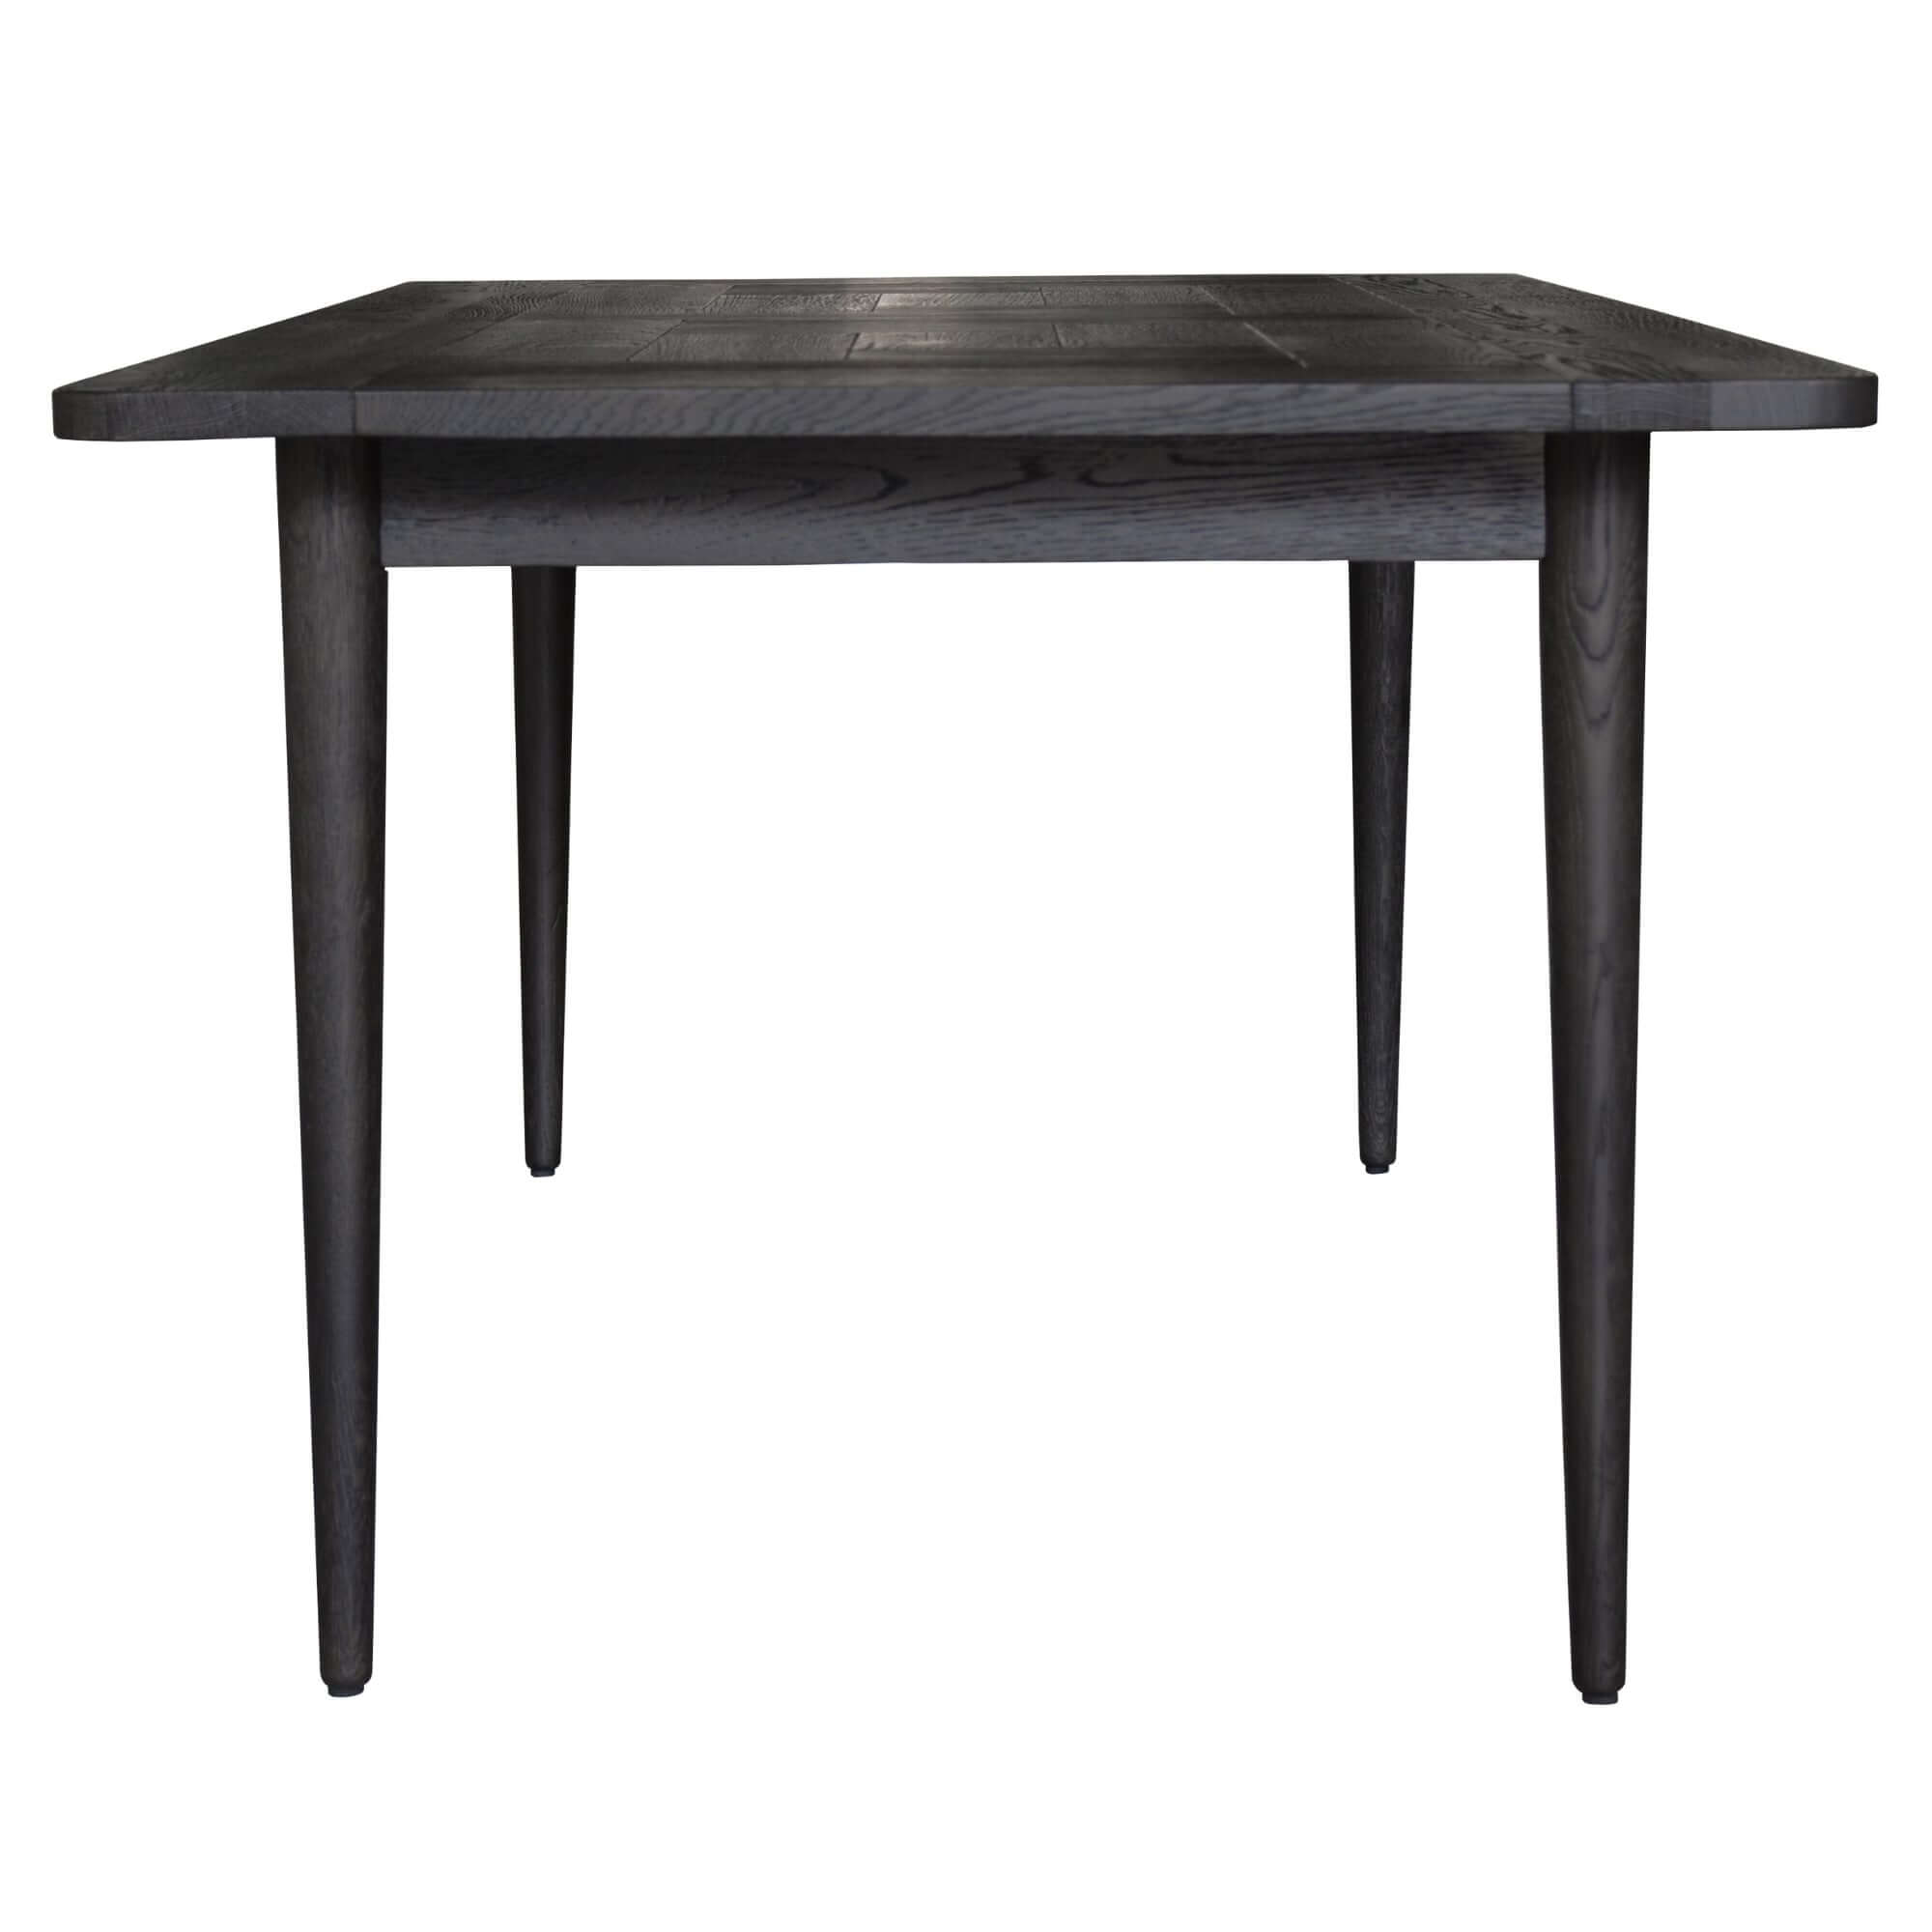 Claire 180cm Oak Dining Table - Industrial Black-Upinteriors